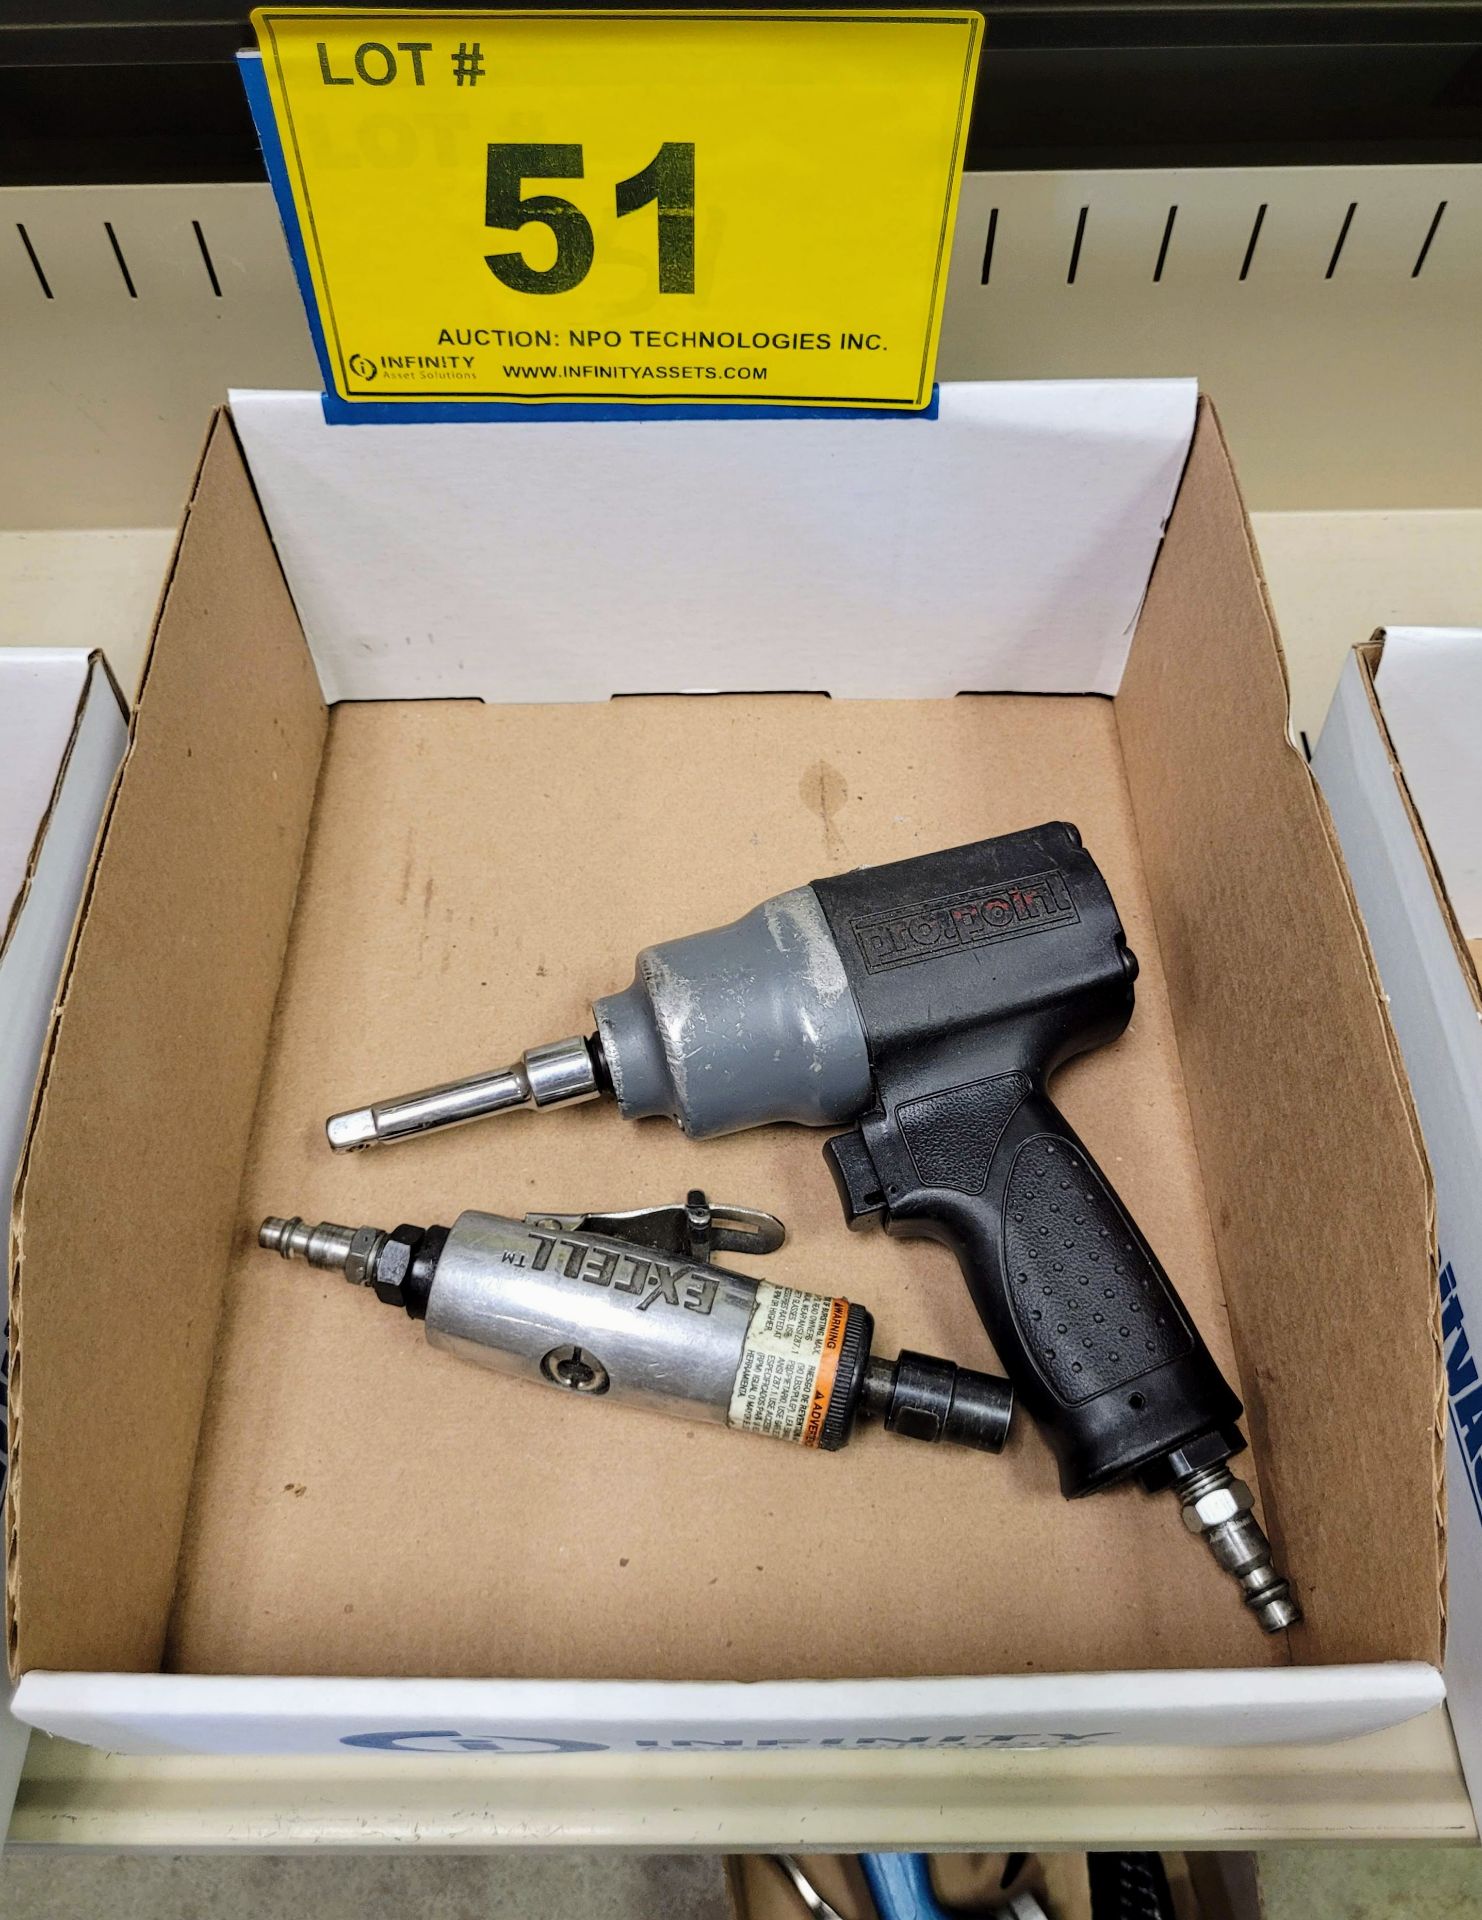 LOT - PRO POINT AIR IMPACT WRENCH W/ DREMEL